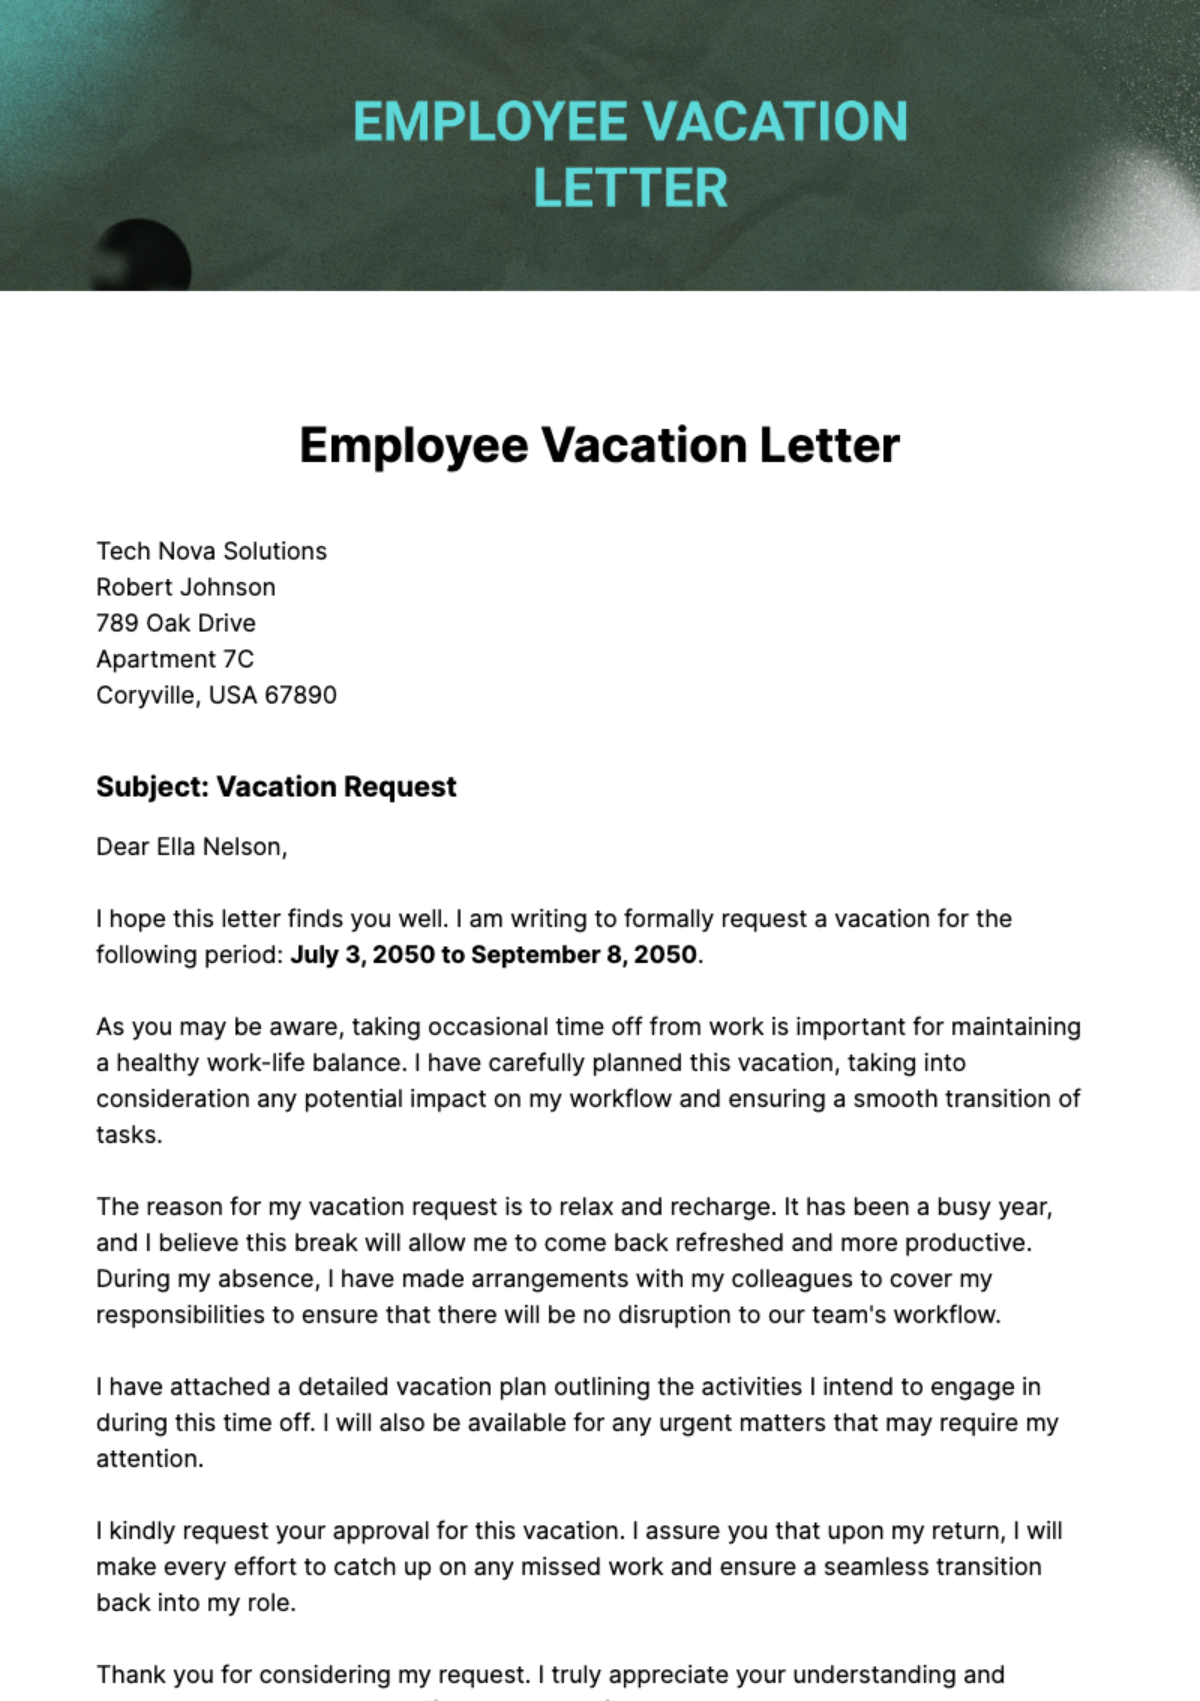 Free Employee Vacation Letter Template